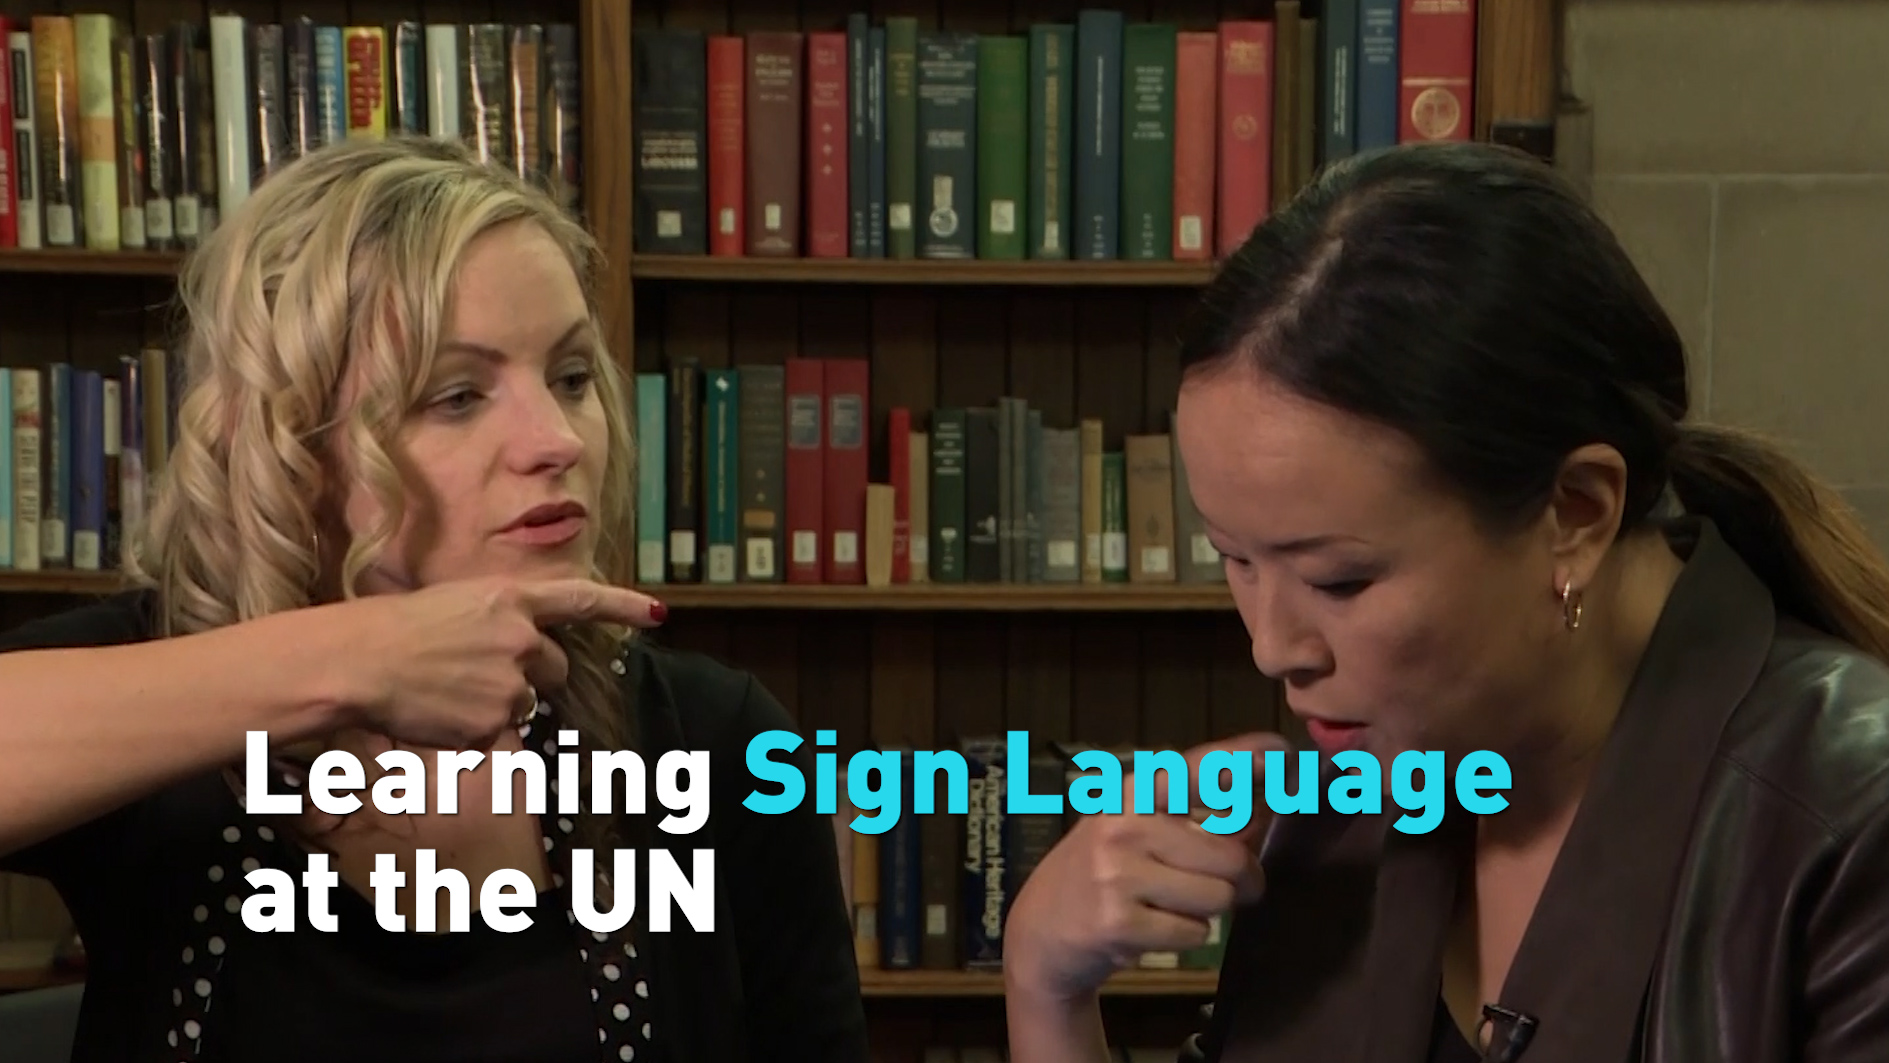 Learning sign language at the UN